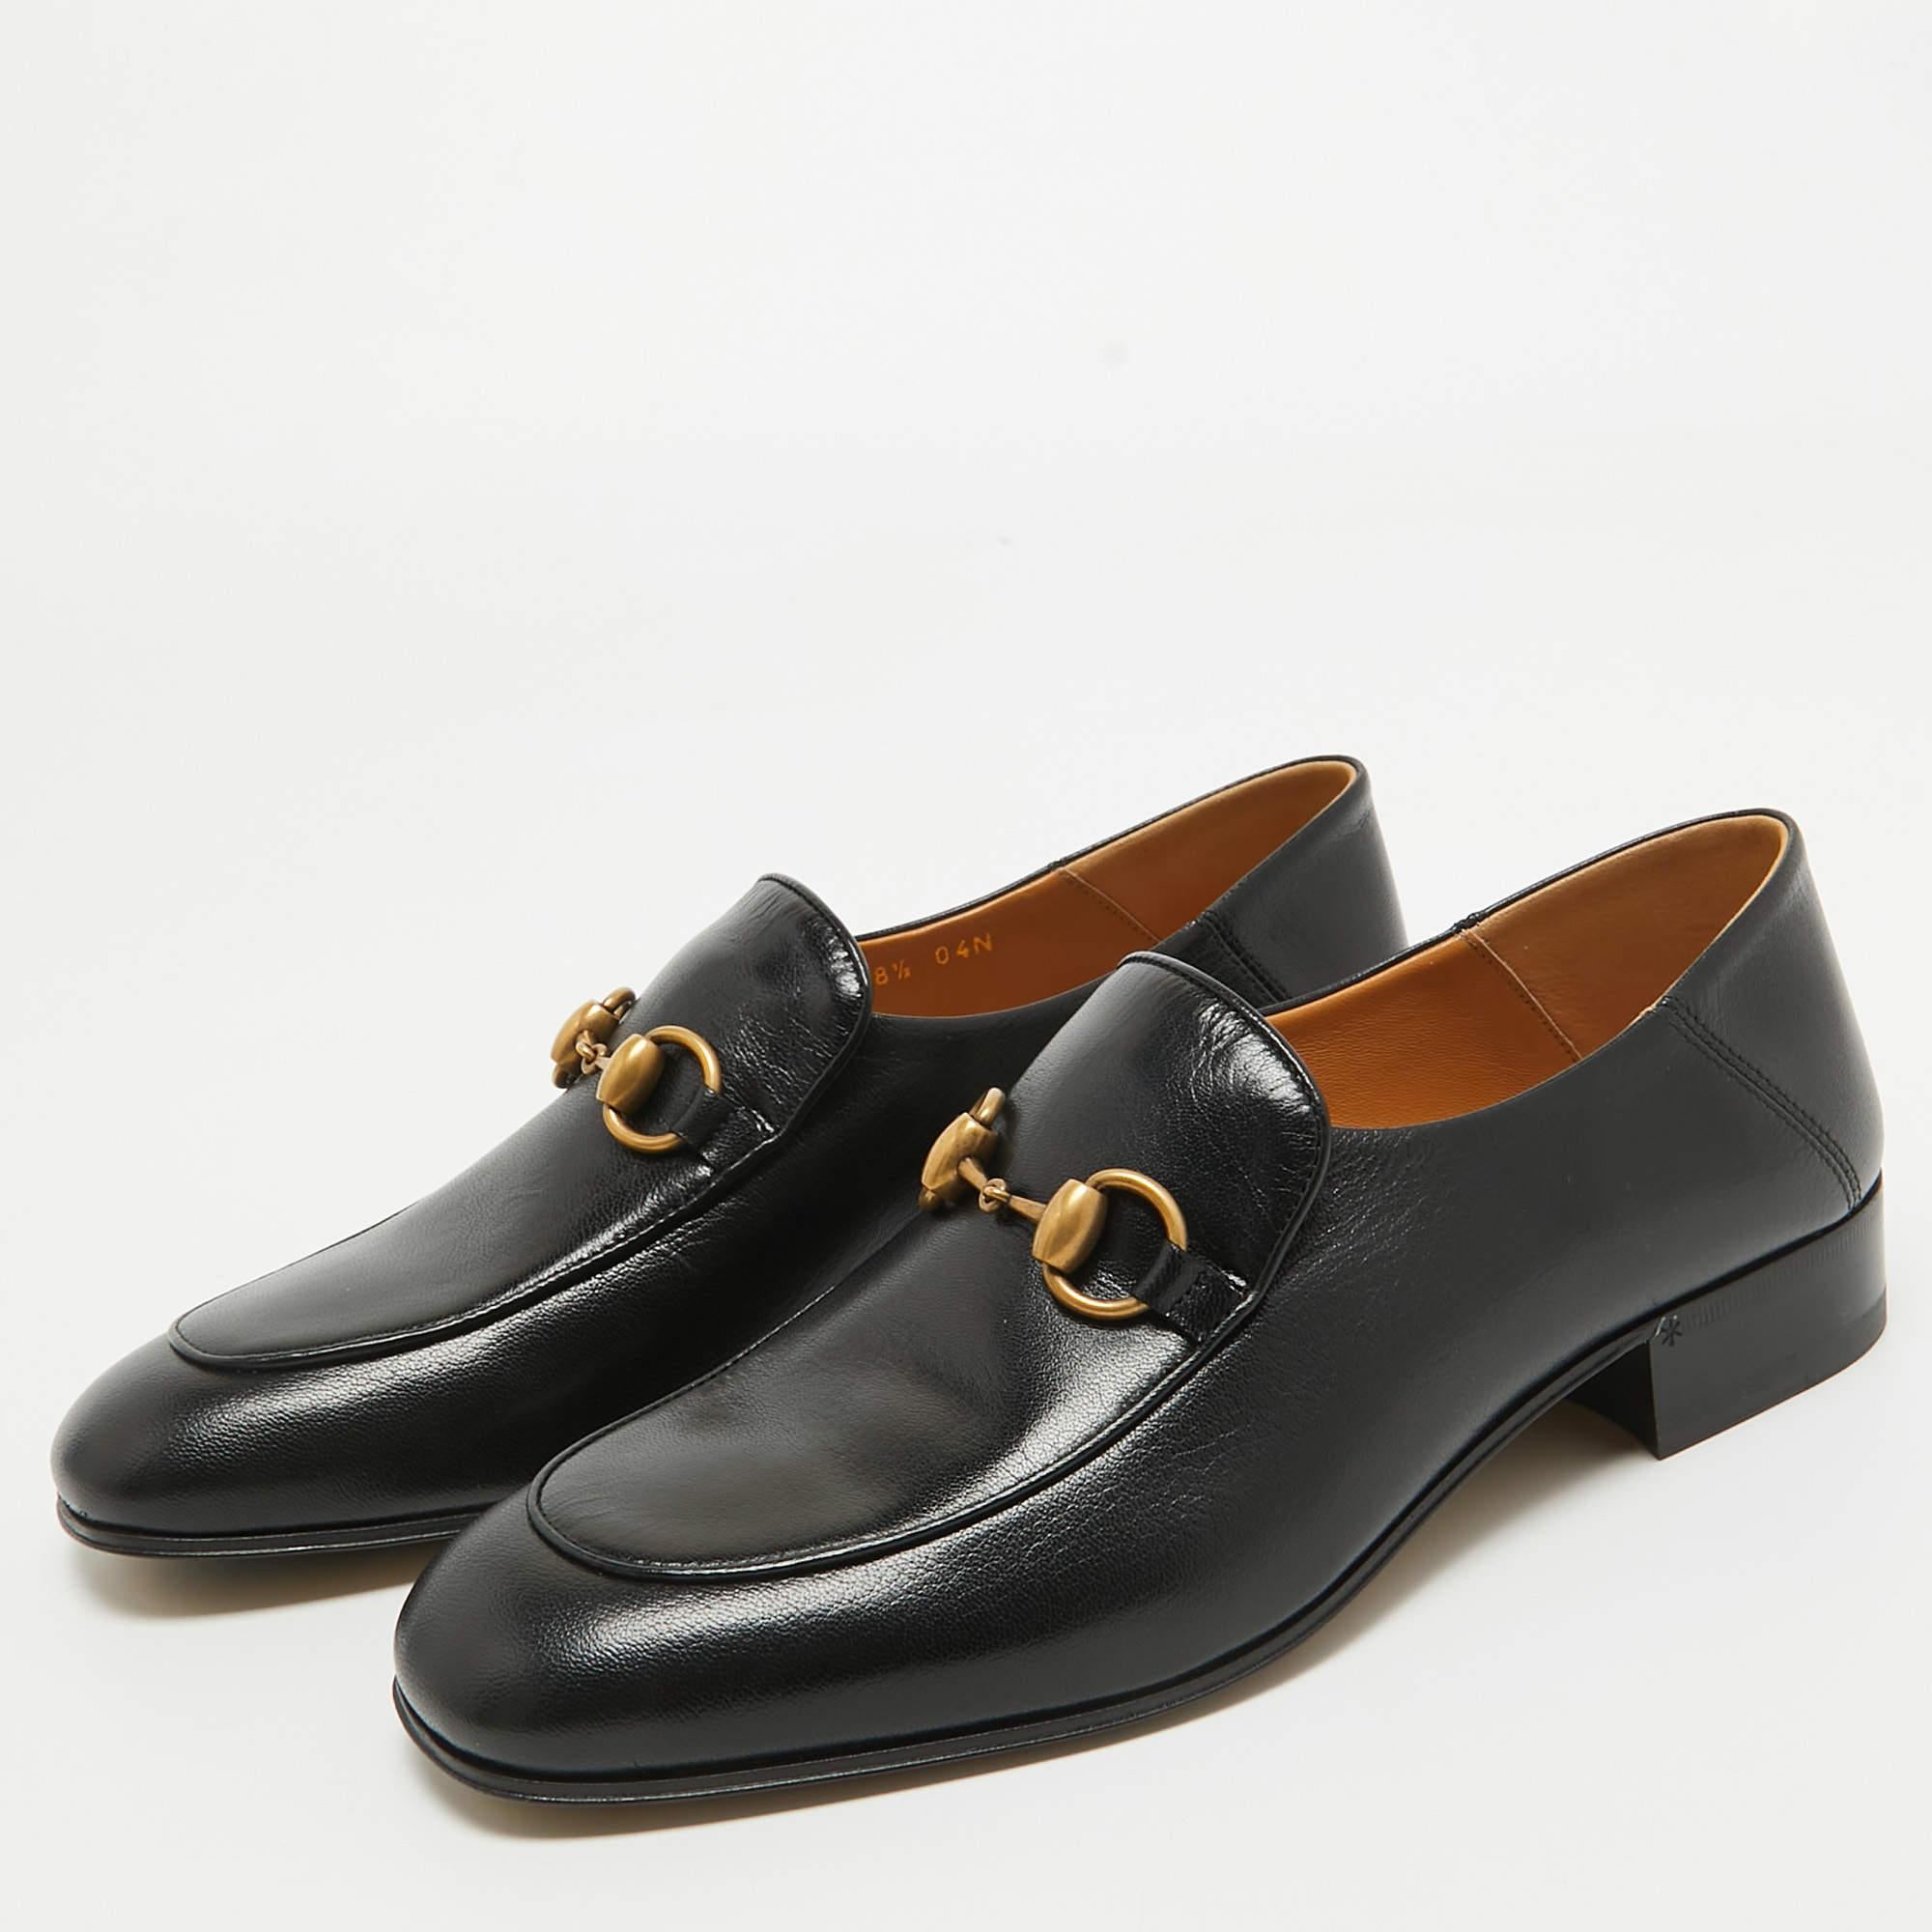 Gucci Black Leather Foldable Horsebit Loafers Size 38.5 5